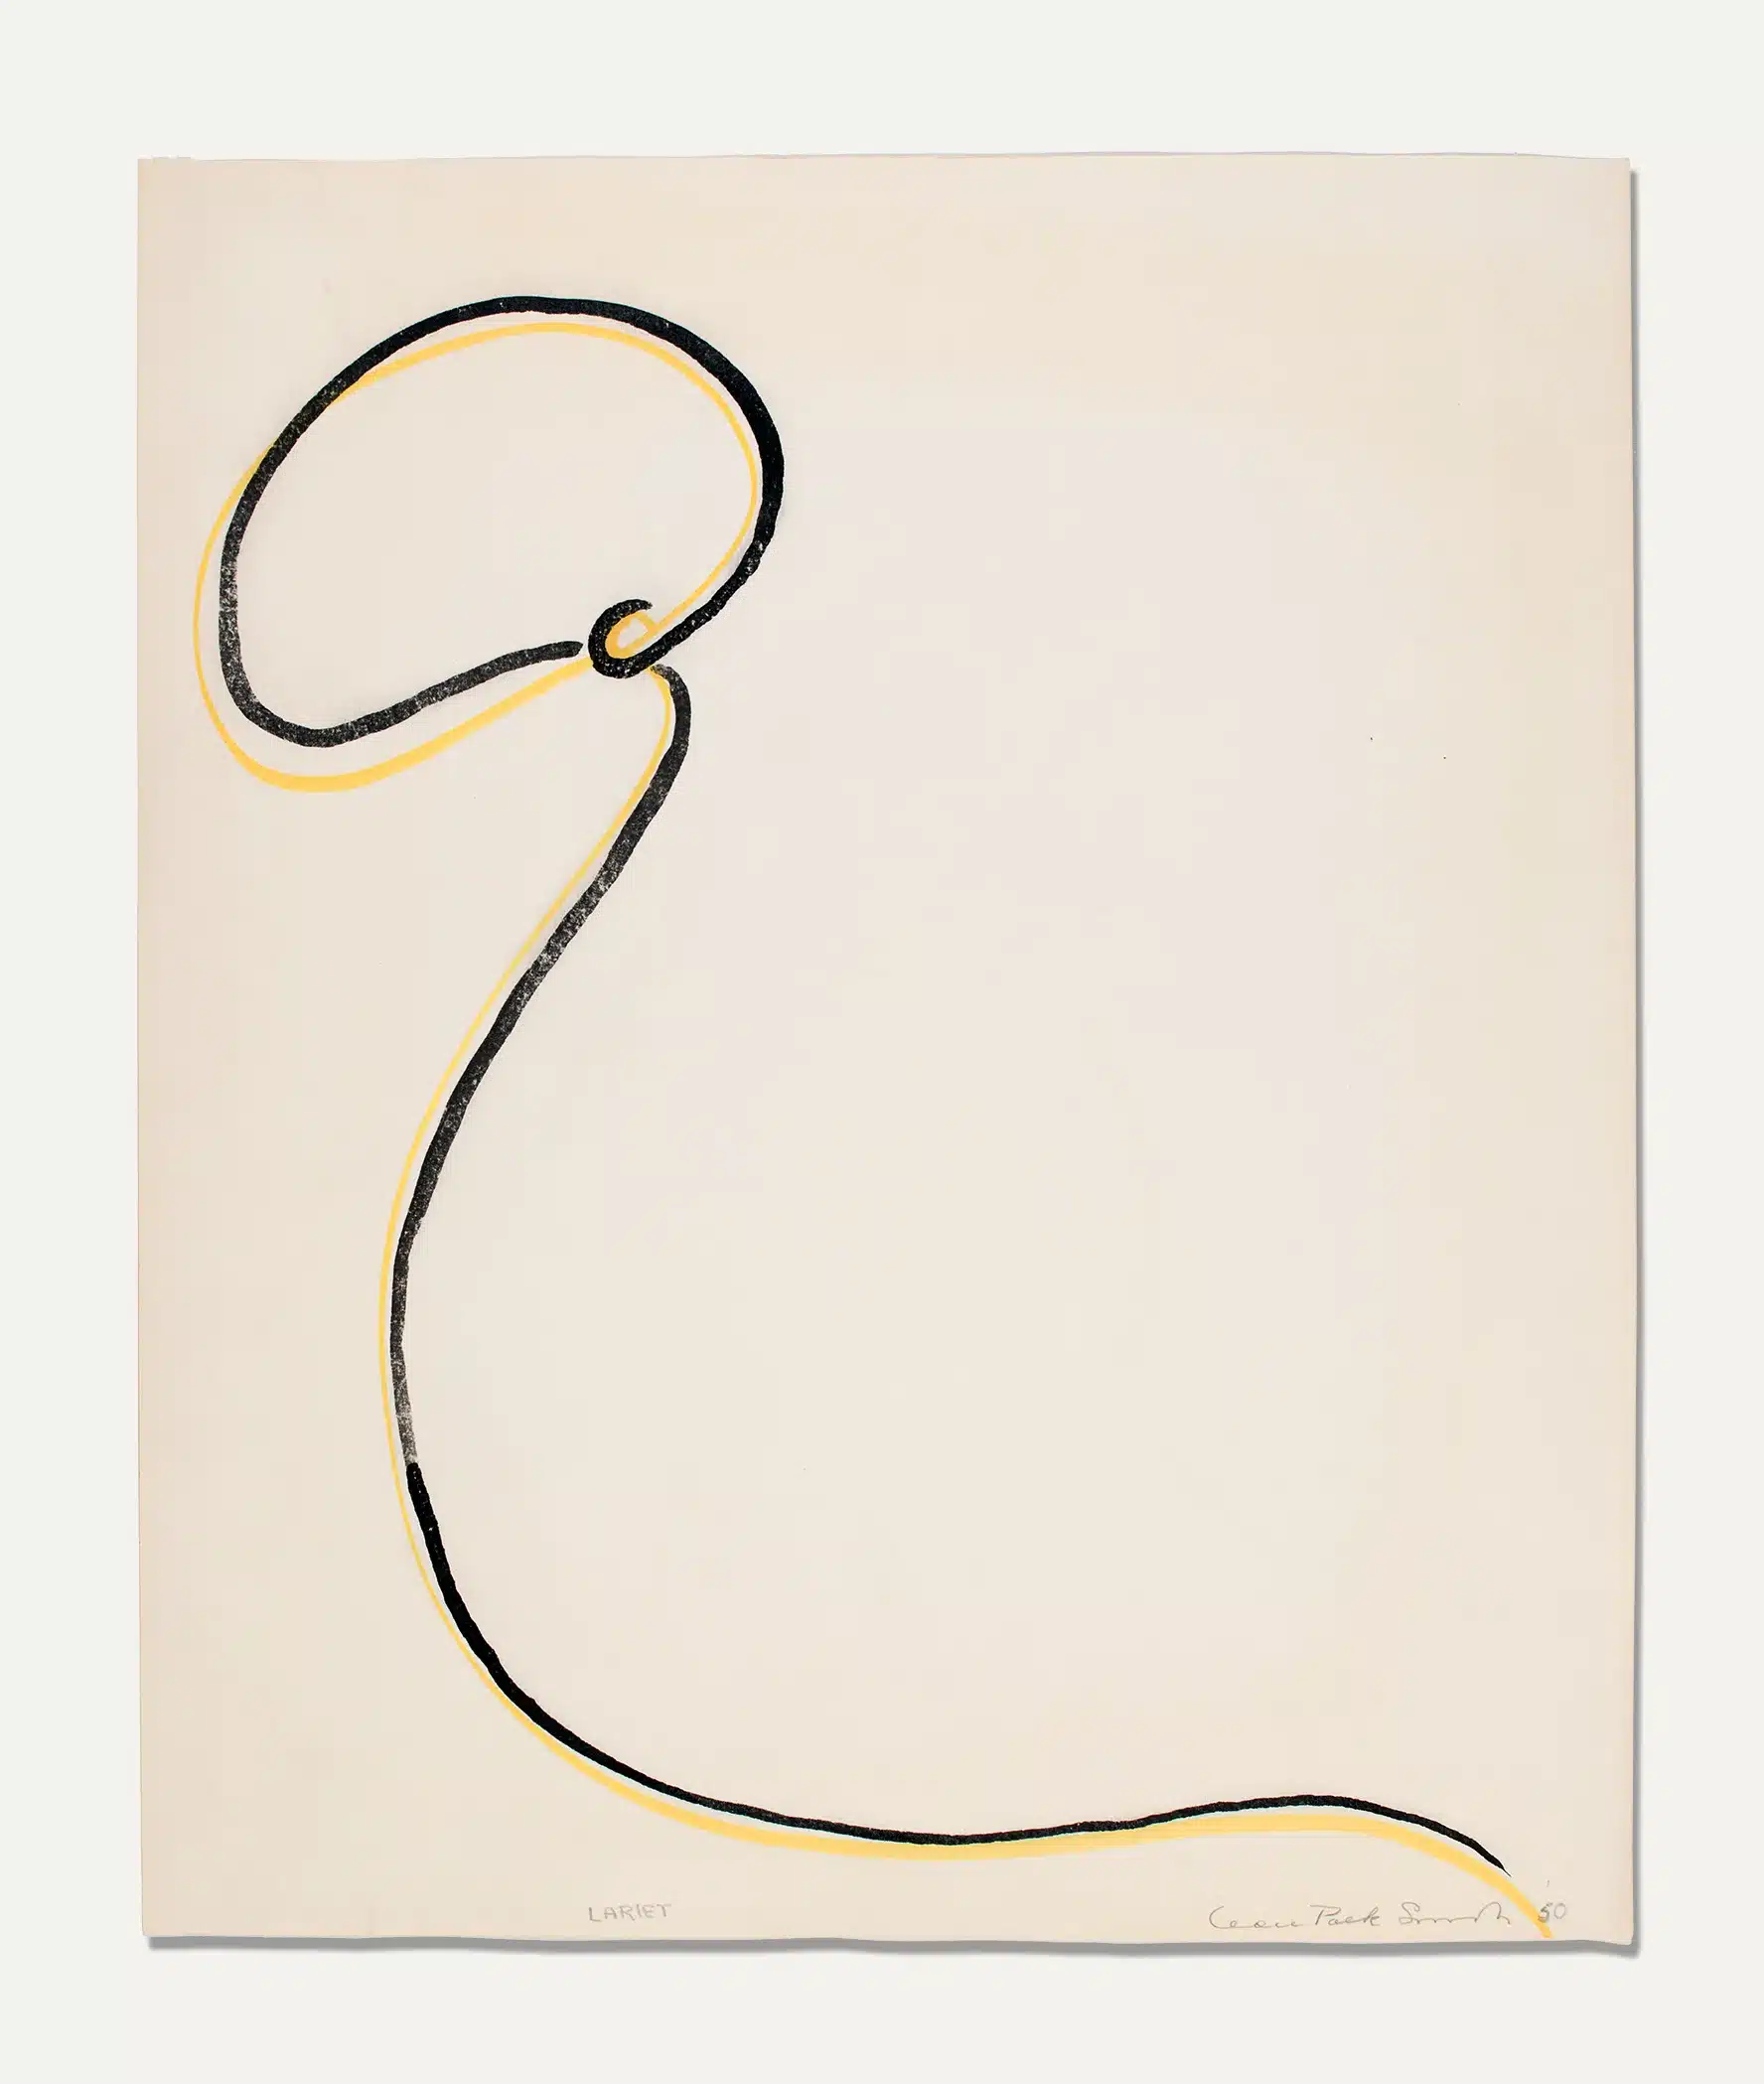 Lariat, 1950. Marker on paper, sheet size: 16 3/4 x 14 in.